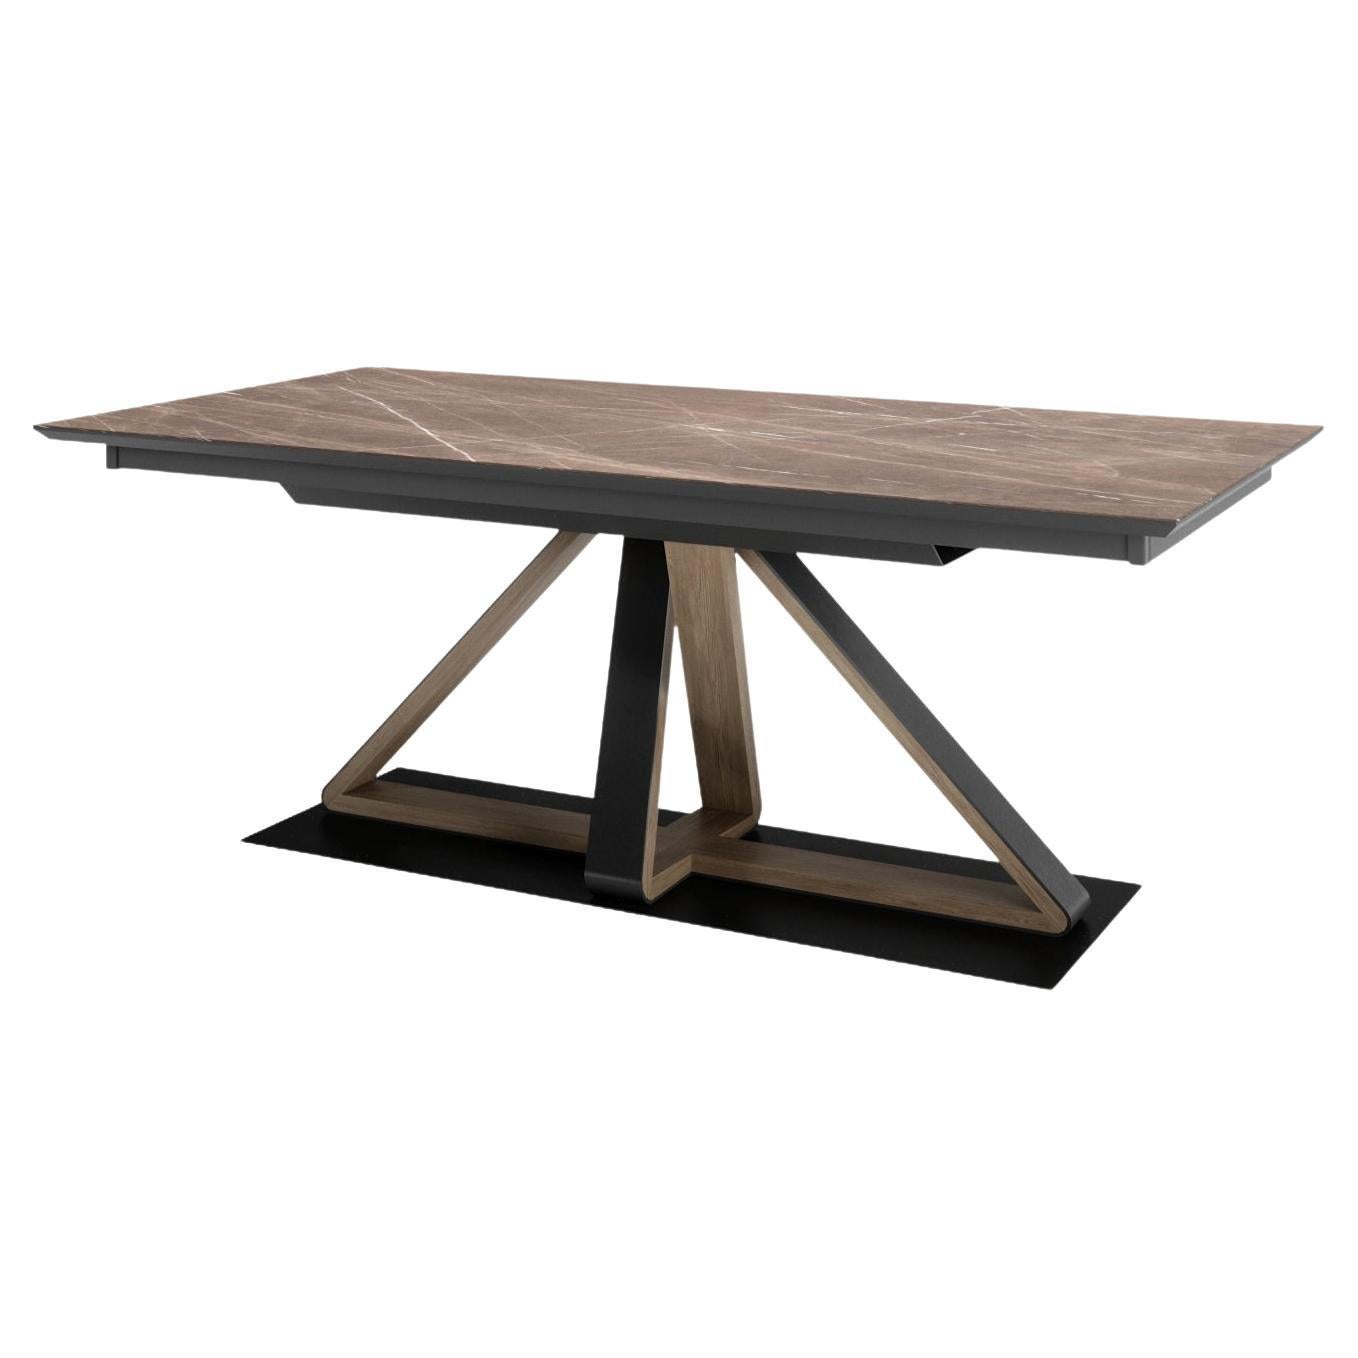 Slide Table 200cm with 2 Extensions of 50cm